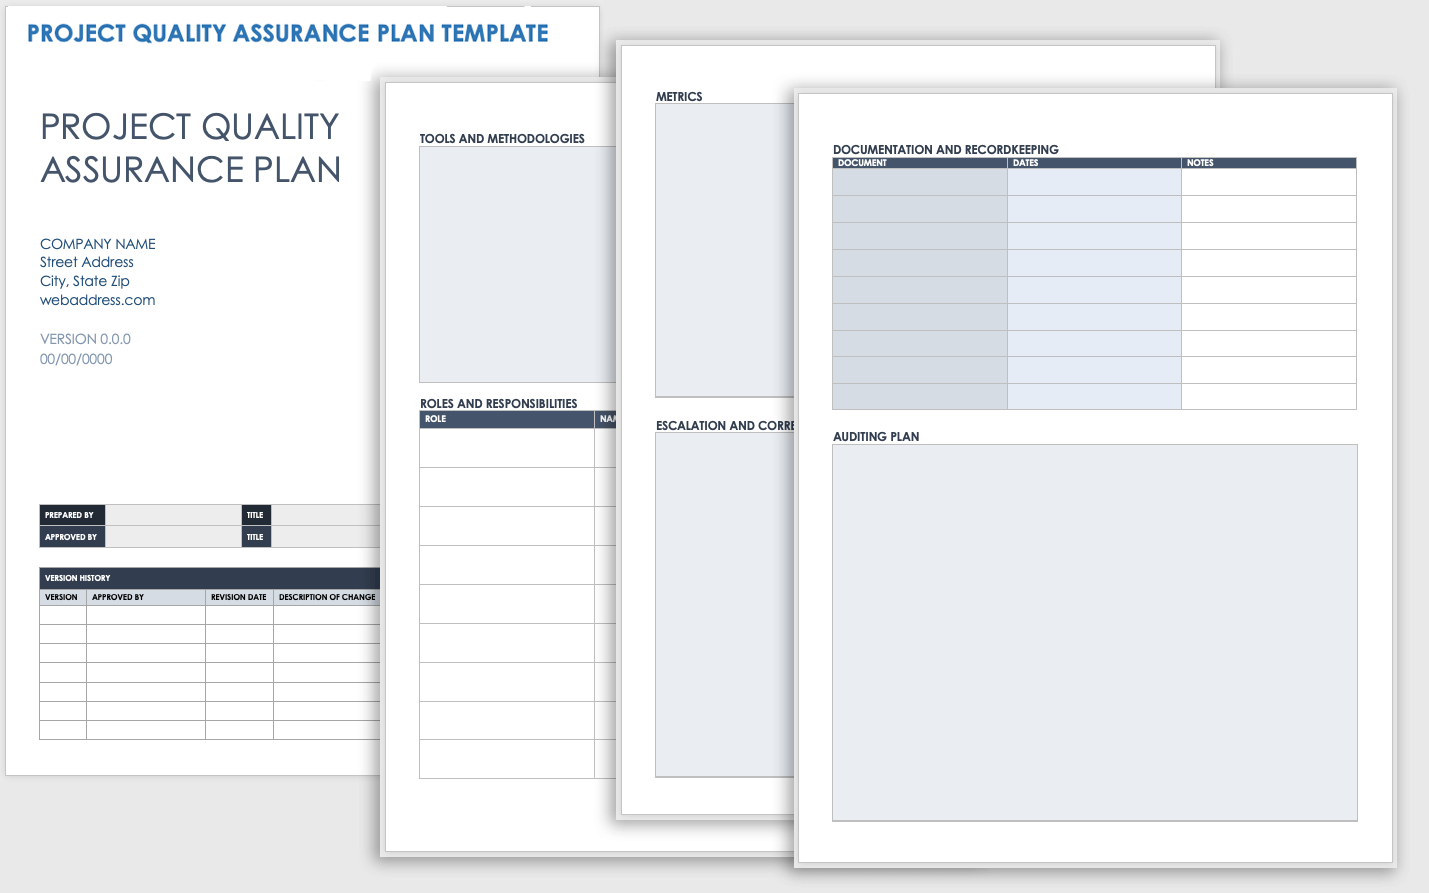 Project Quality Assurance Plan Template